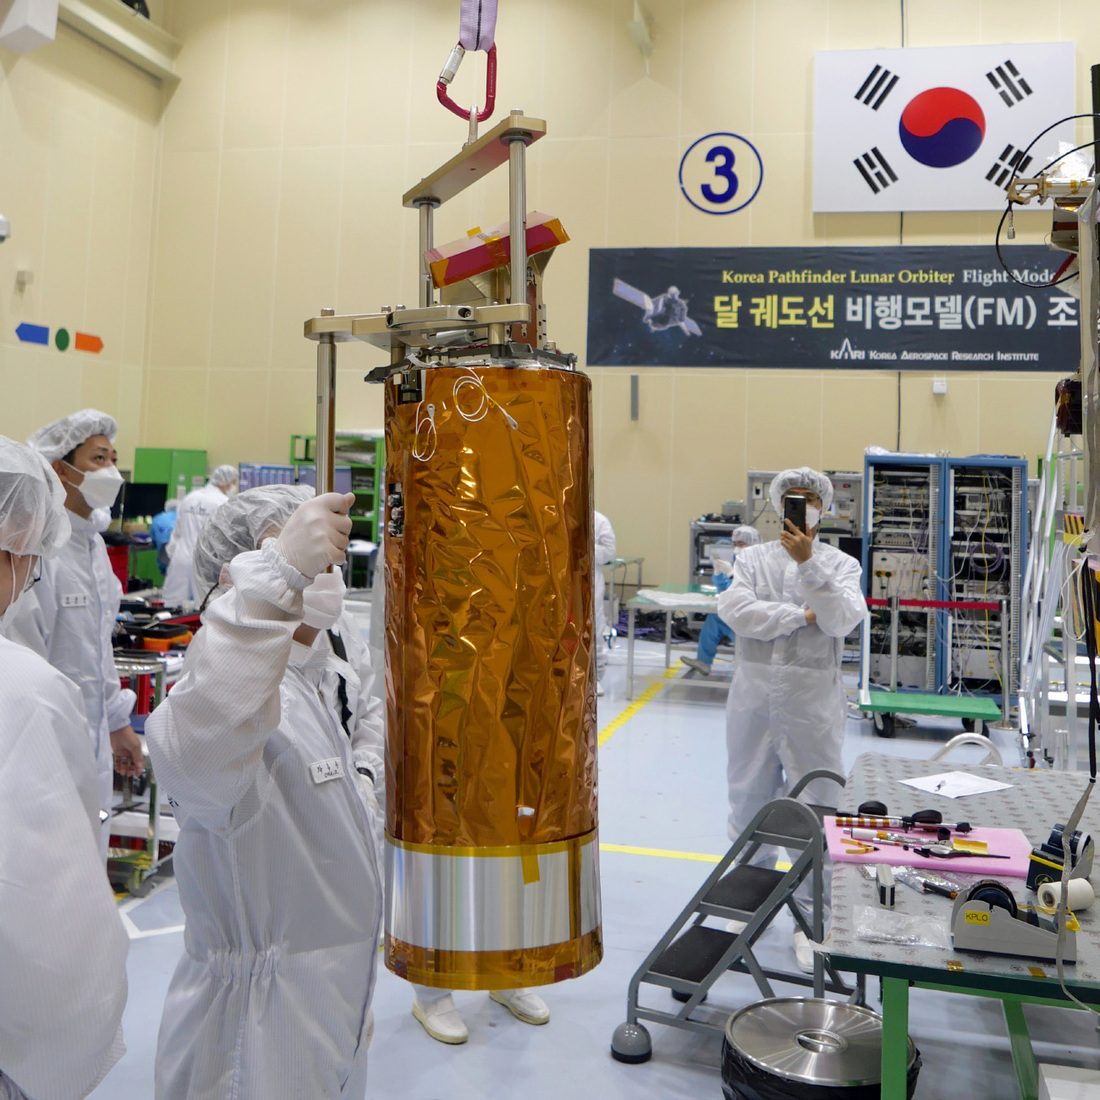 The ShadowCam instrument is carefully hoisted up before being transferred and mounted to the Korean Pathfinder Lunar Orbiter satellite at the Korean Aerospace Research Institute in Daejeon, Korea.